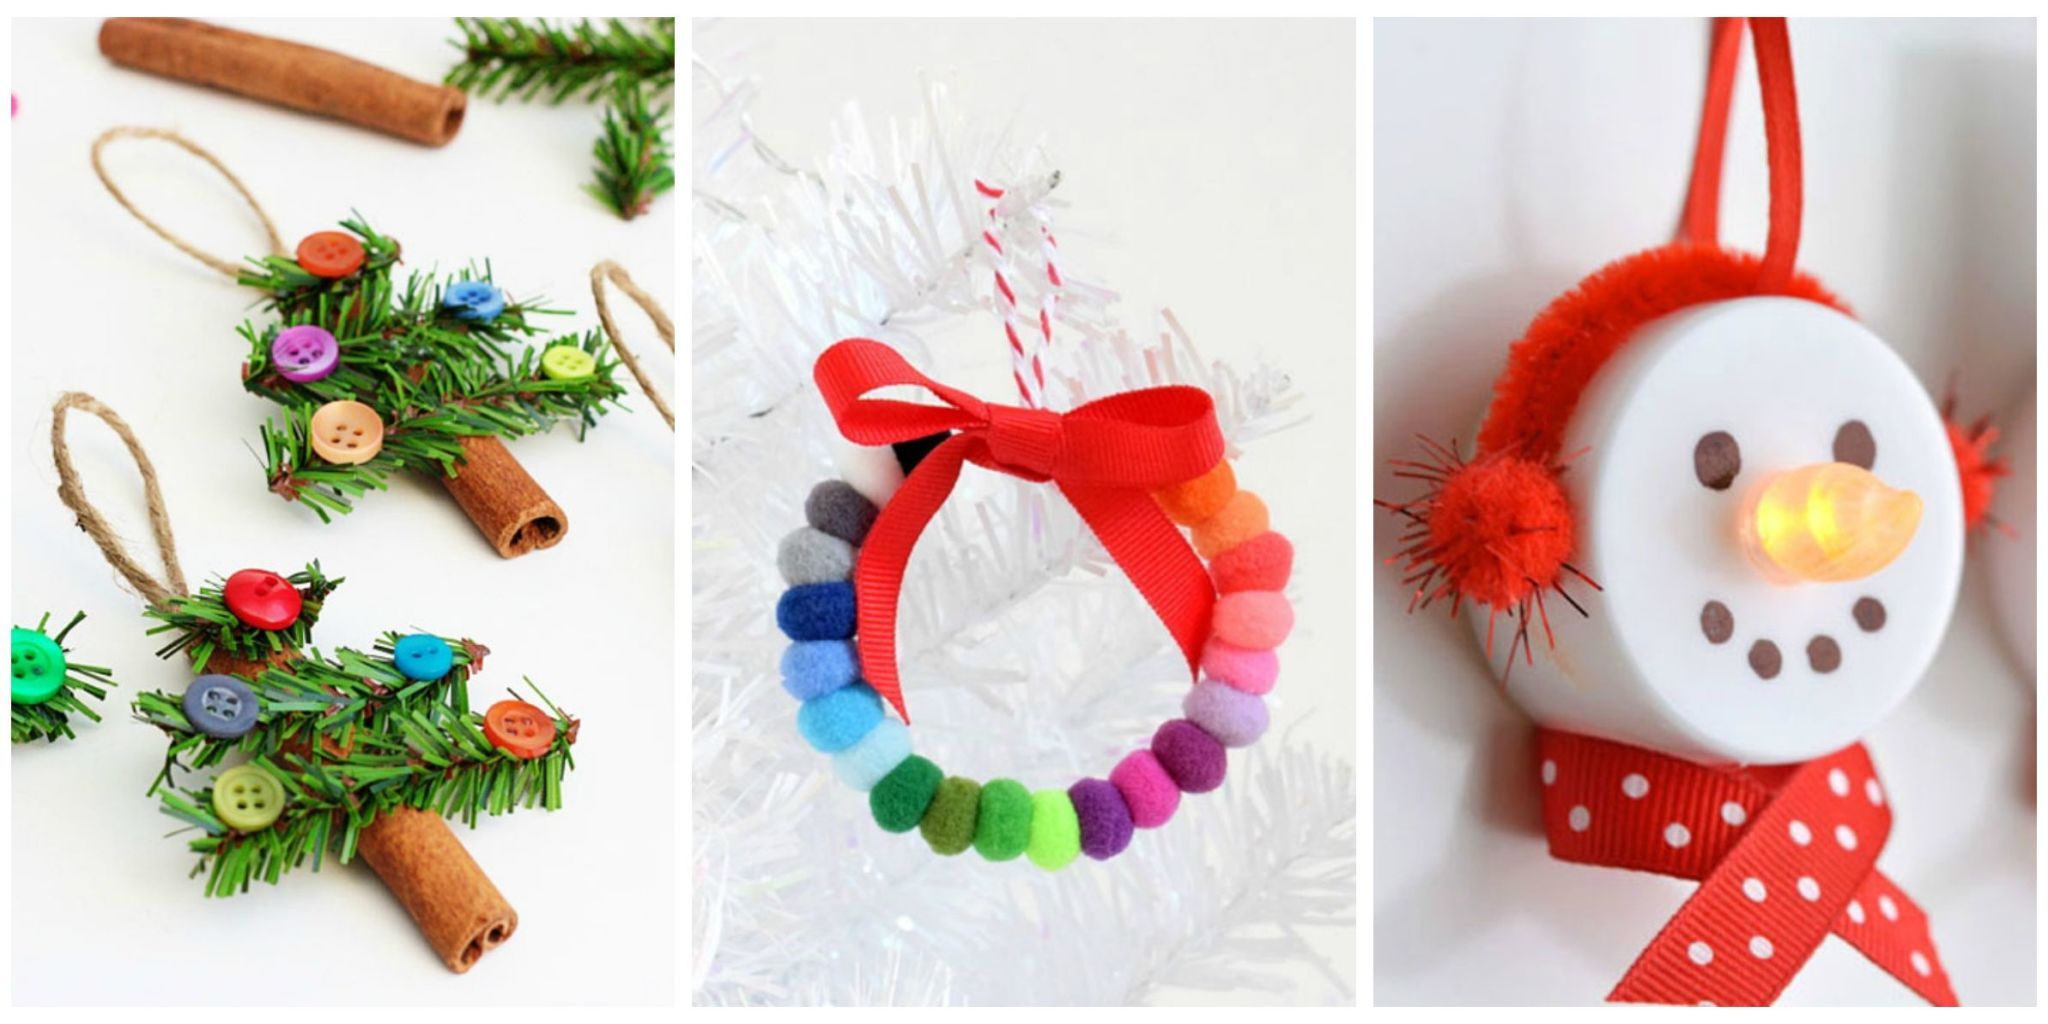 Christmas ornament crafts for adults